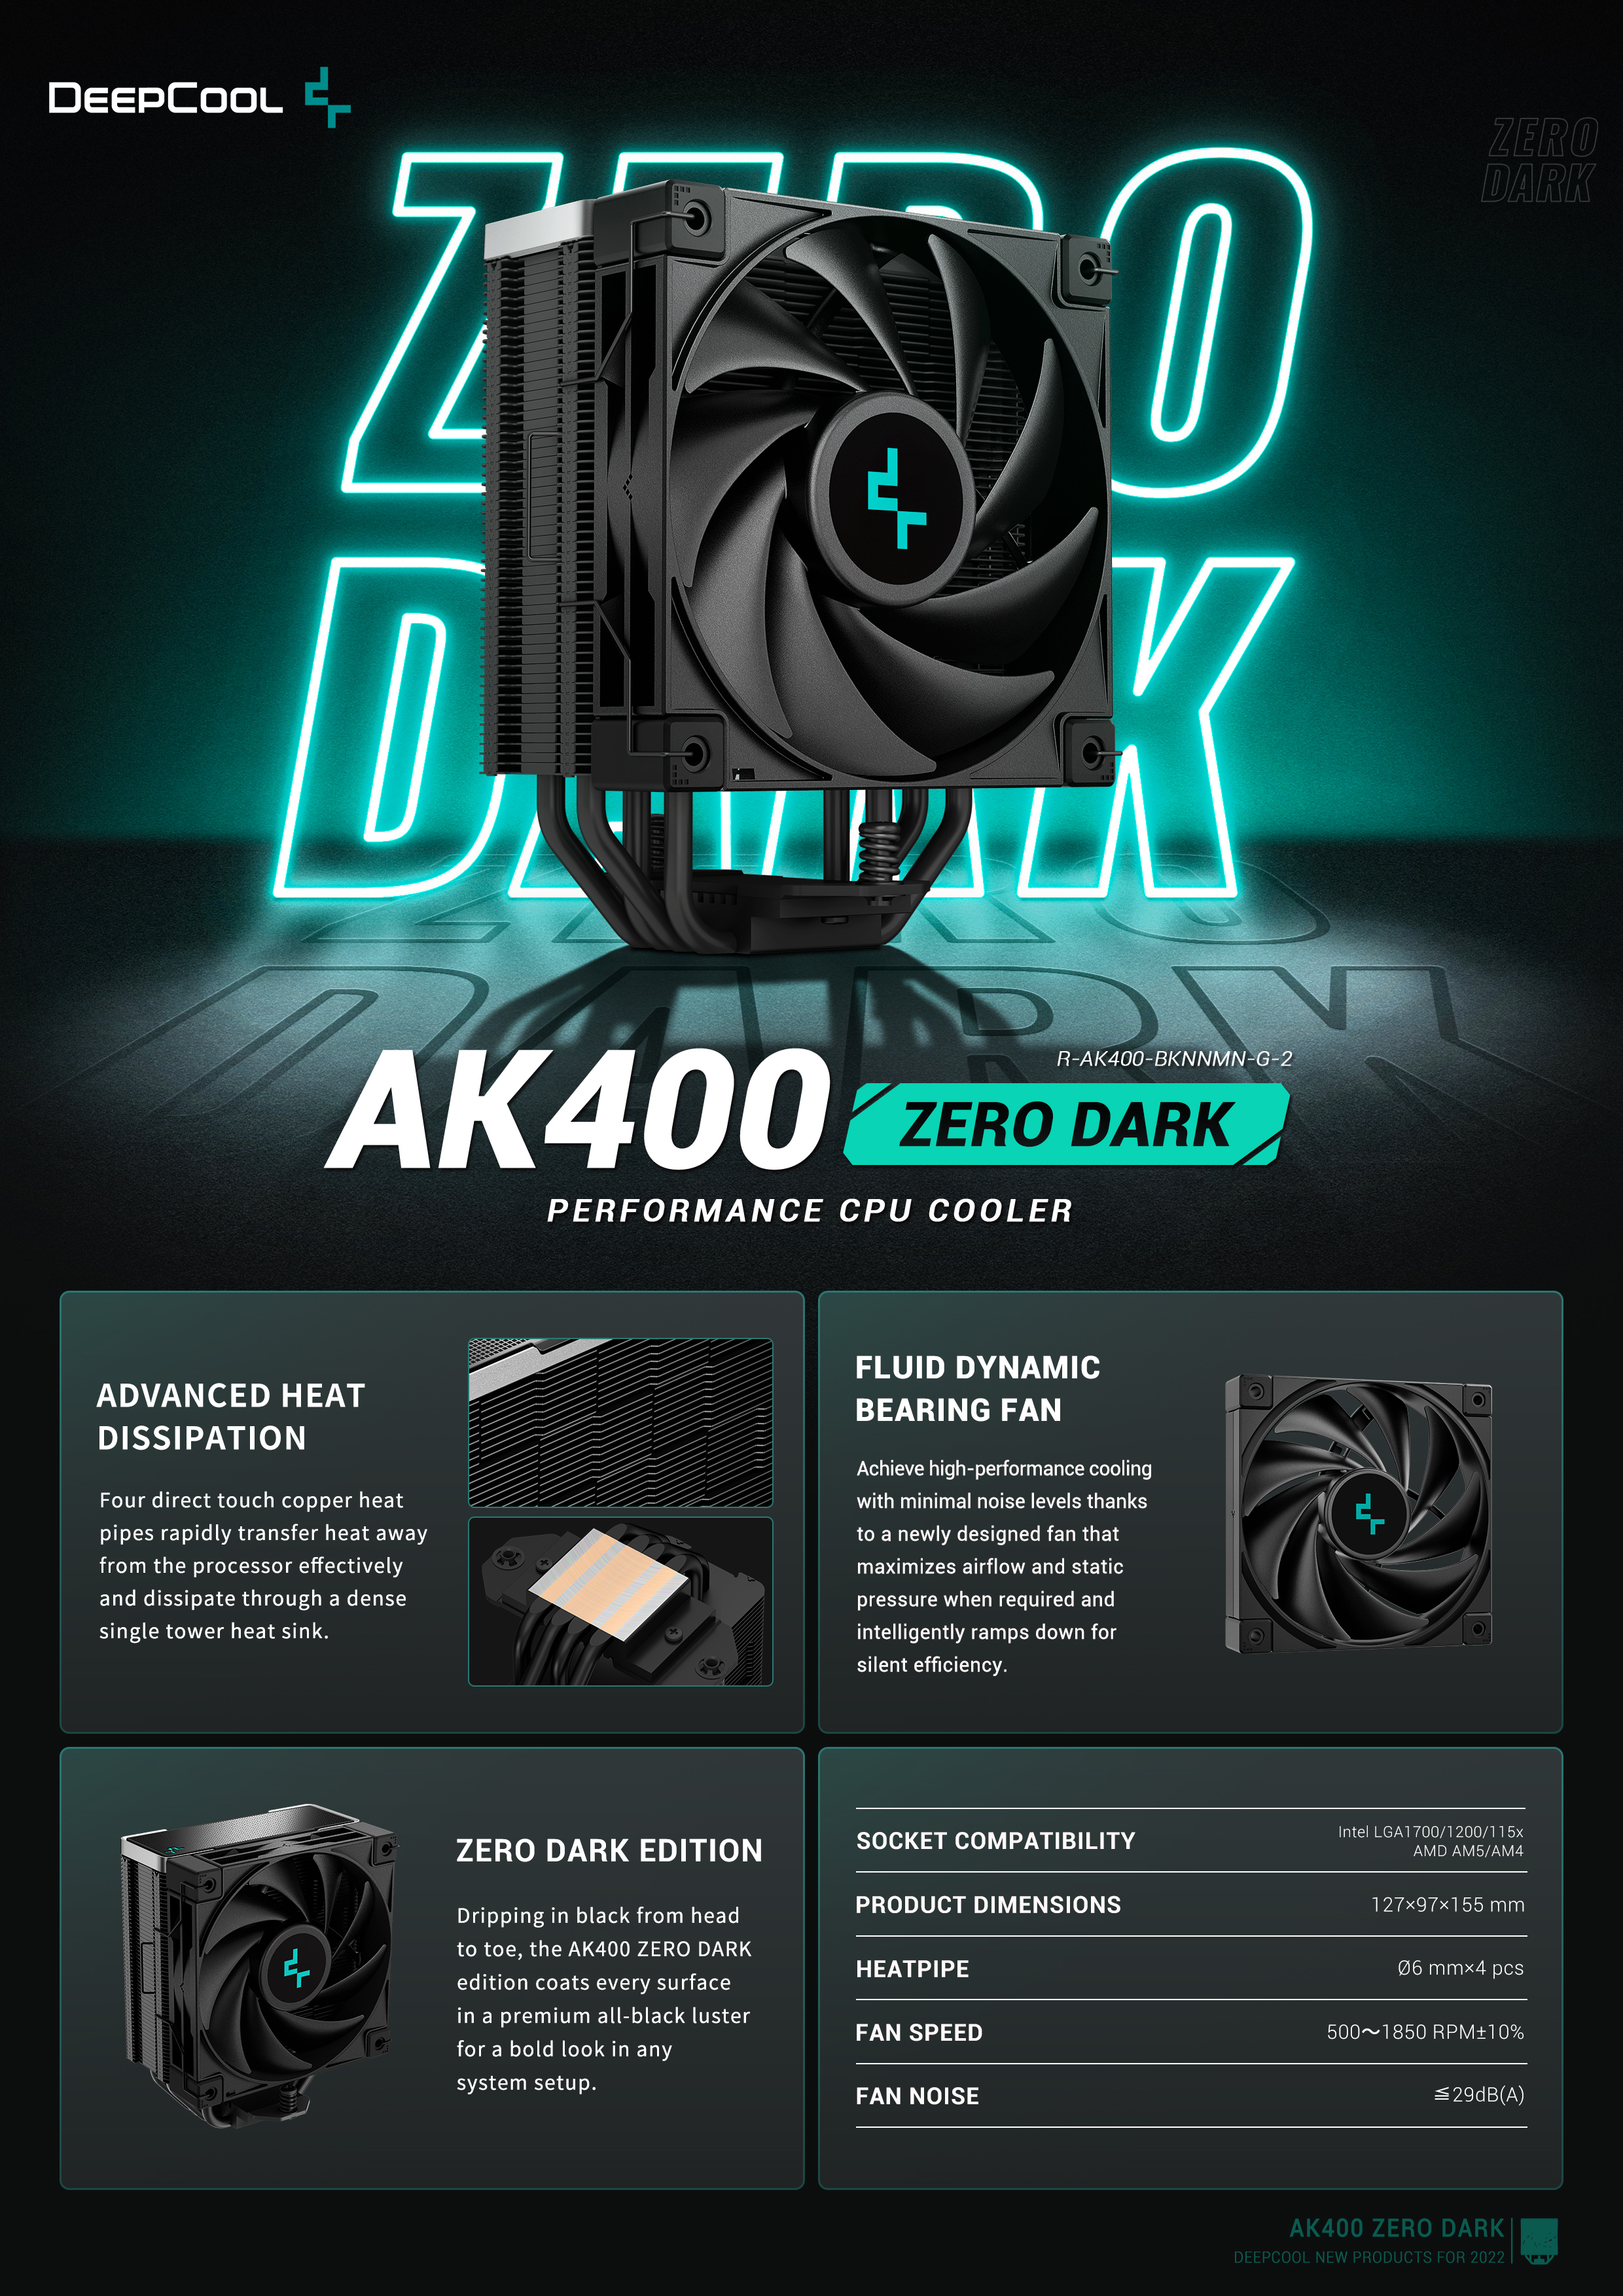 A large marketing image providing additional information about the product DeepCool AK400 Zero Dark CPU Cooler - Additional alt info not provided